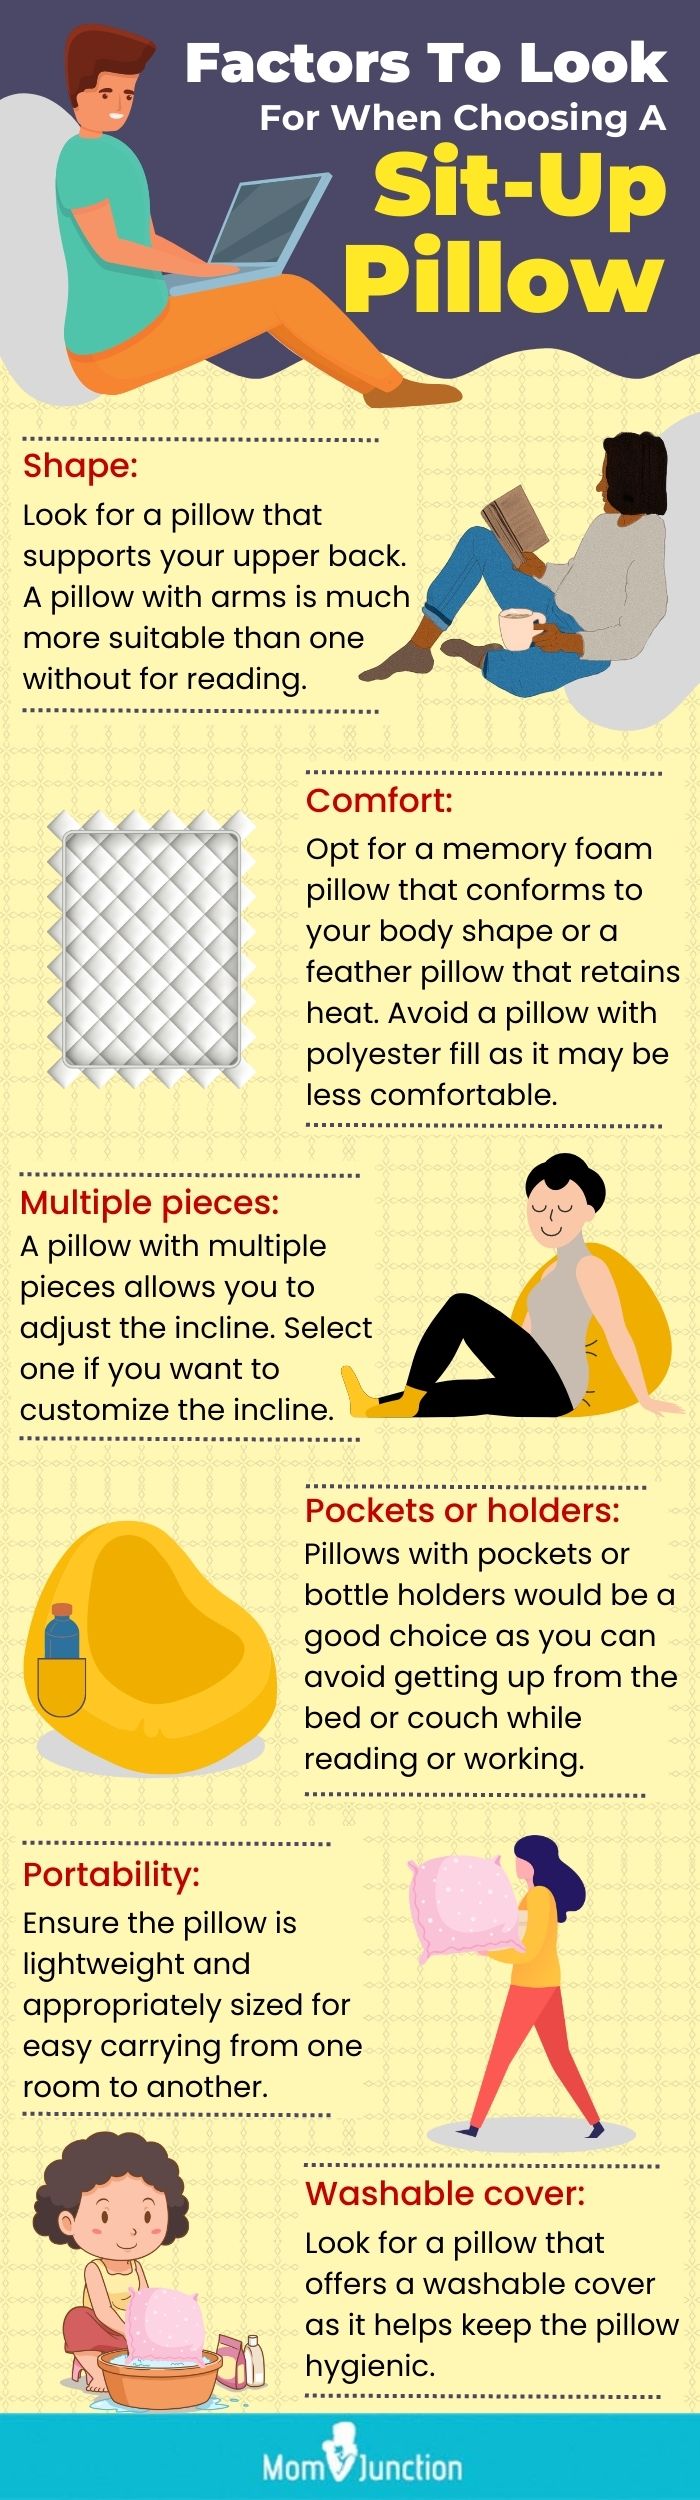 How to Arrange Pillows to Sit Up in Bed